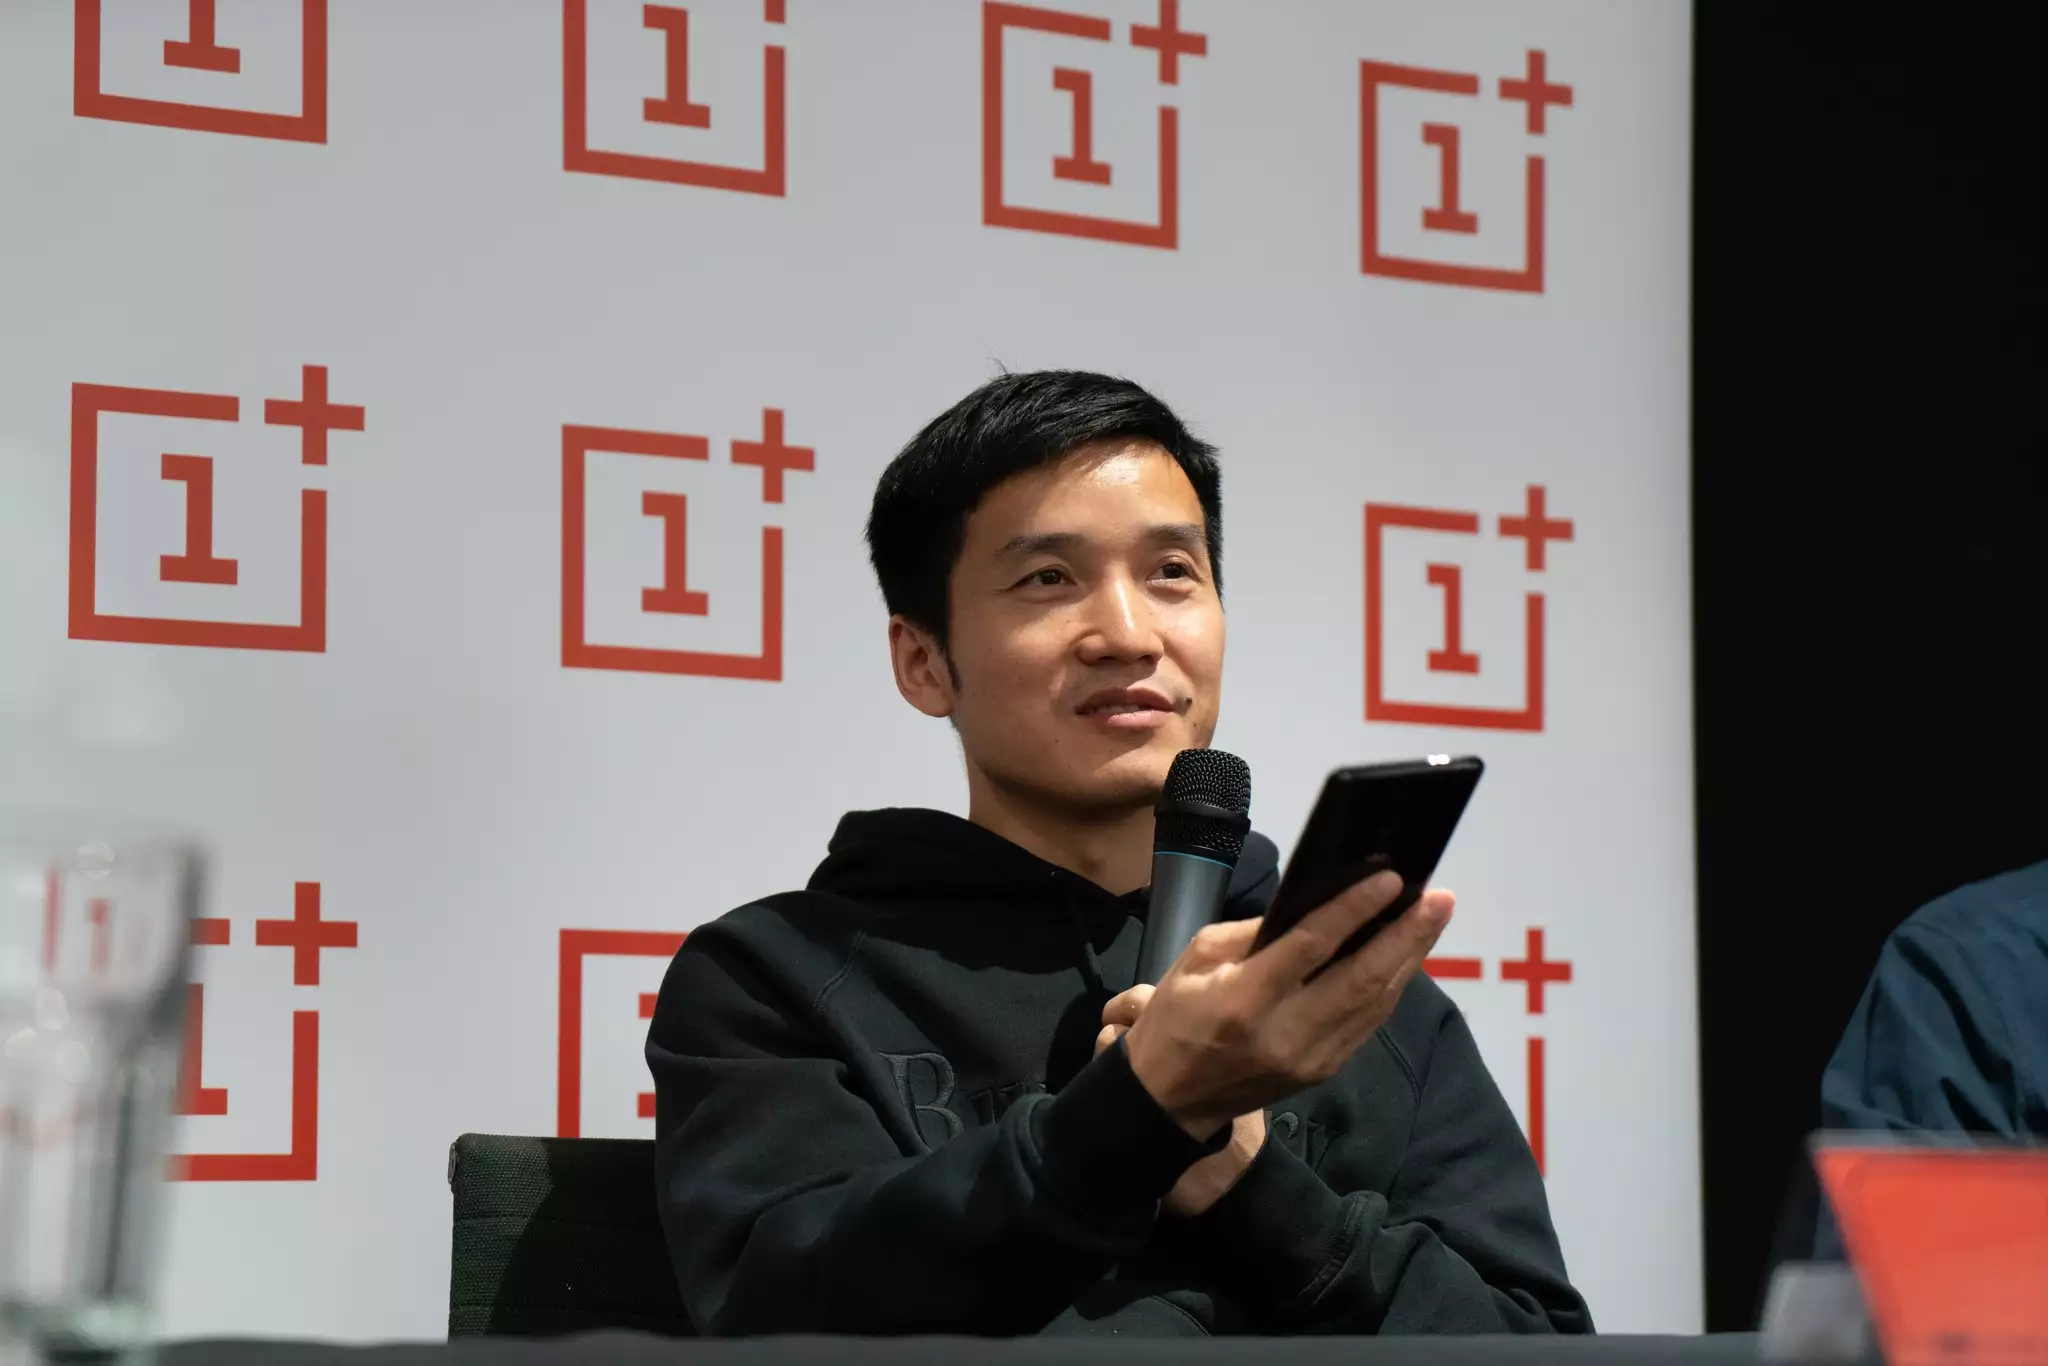 ETTelecom Interviews: OnePlus founder Pete Lau on India 5G opportunity, new product categories and R&D